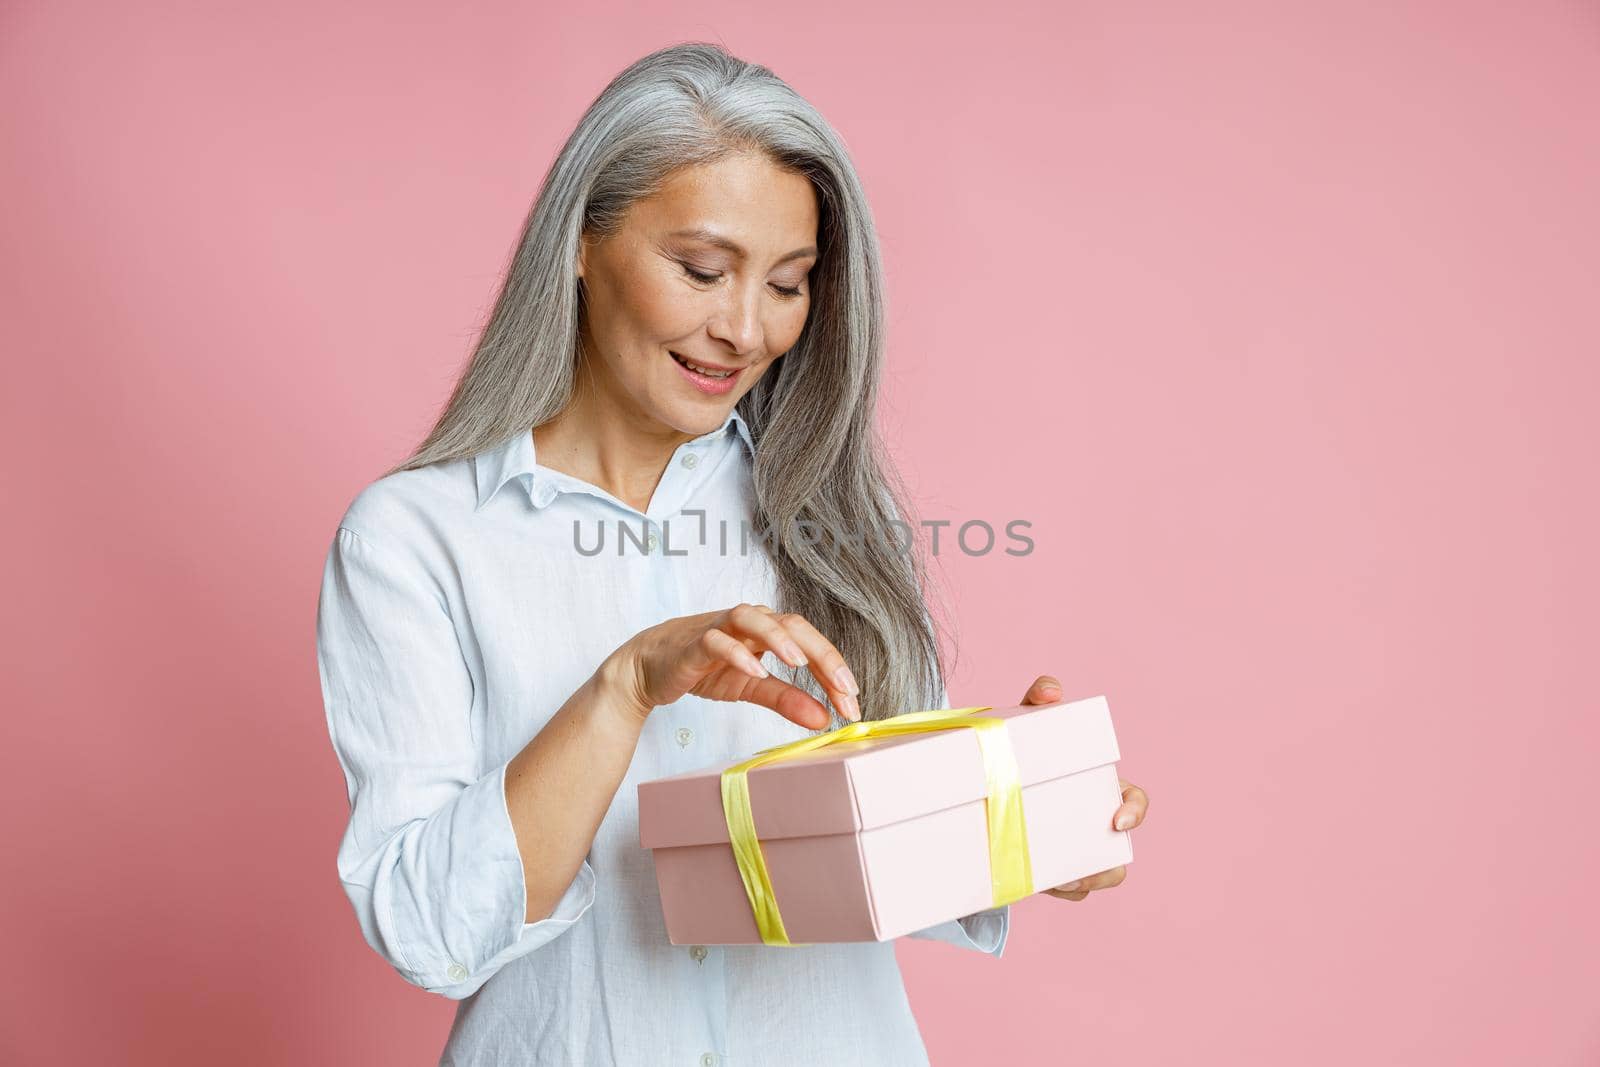 Smiling middle aged Asian woman with long grey hair opens gift box decorated with ribbon posing on pink background in studio